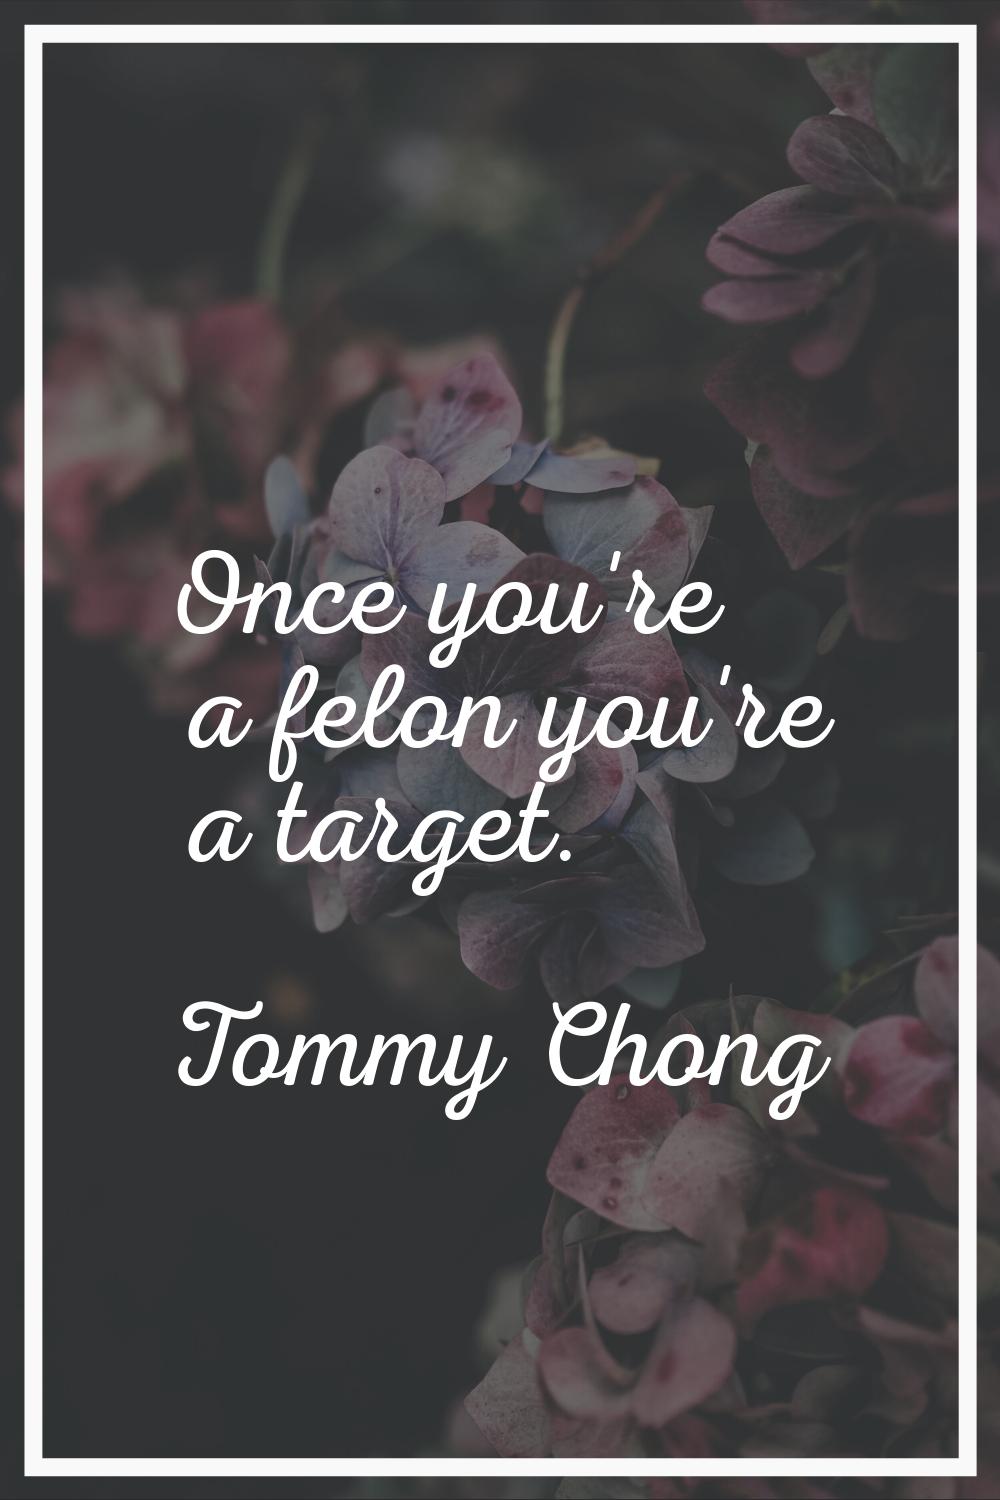 Once you're a felon you're a target.